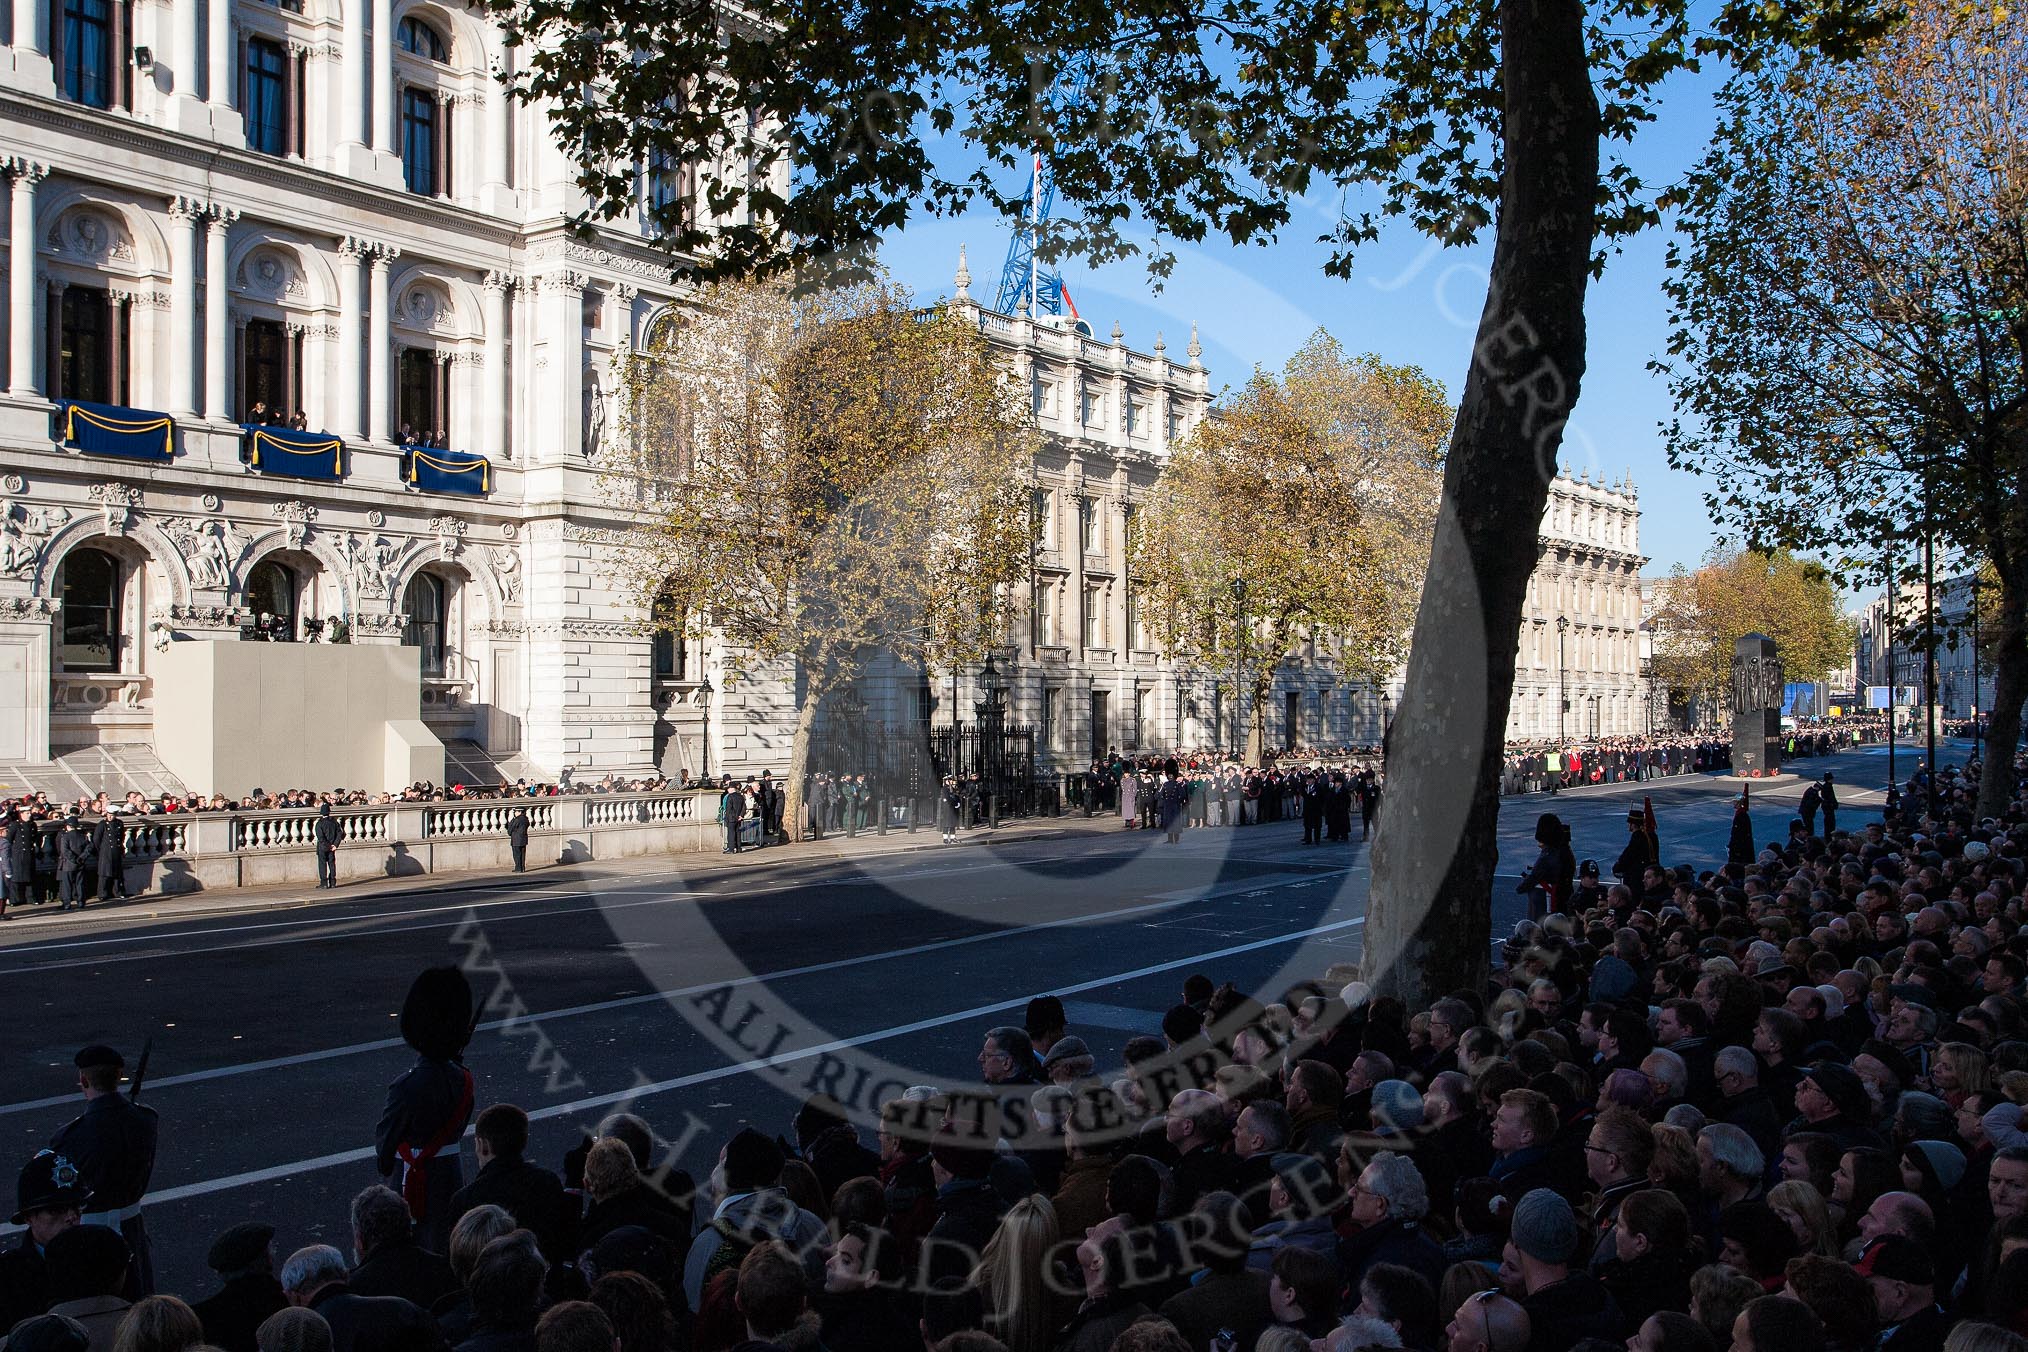 View towards the eastern side of Whitehall. The column of ex-Servicemen and women is in position on the right, close to the entrance of Downing Street.